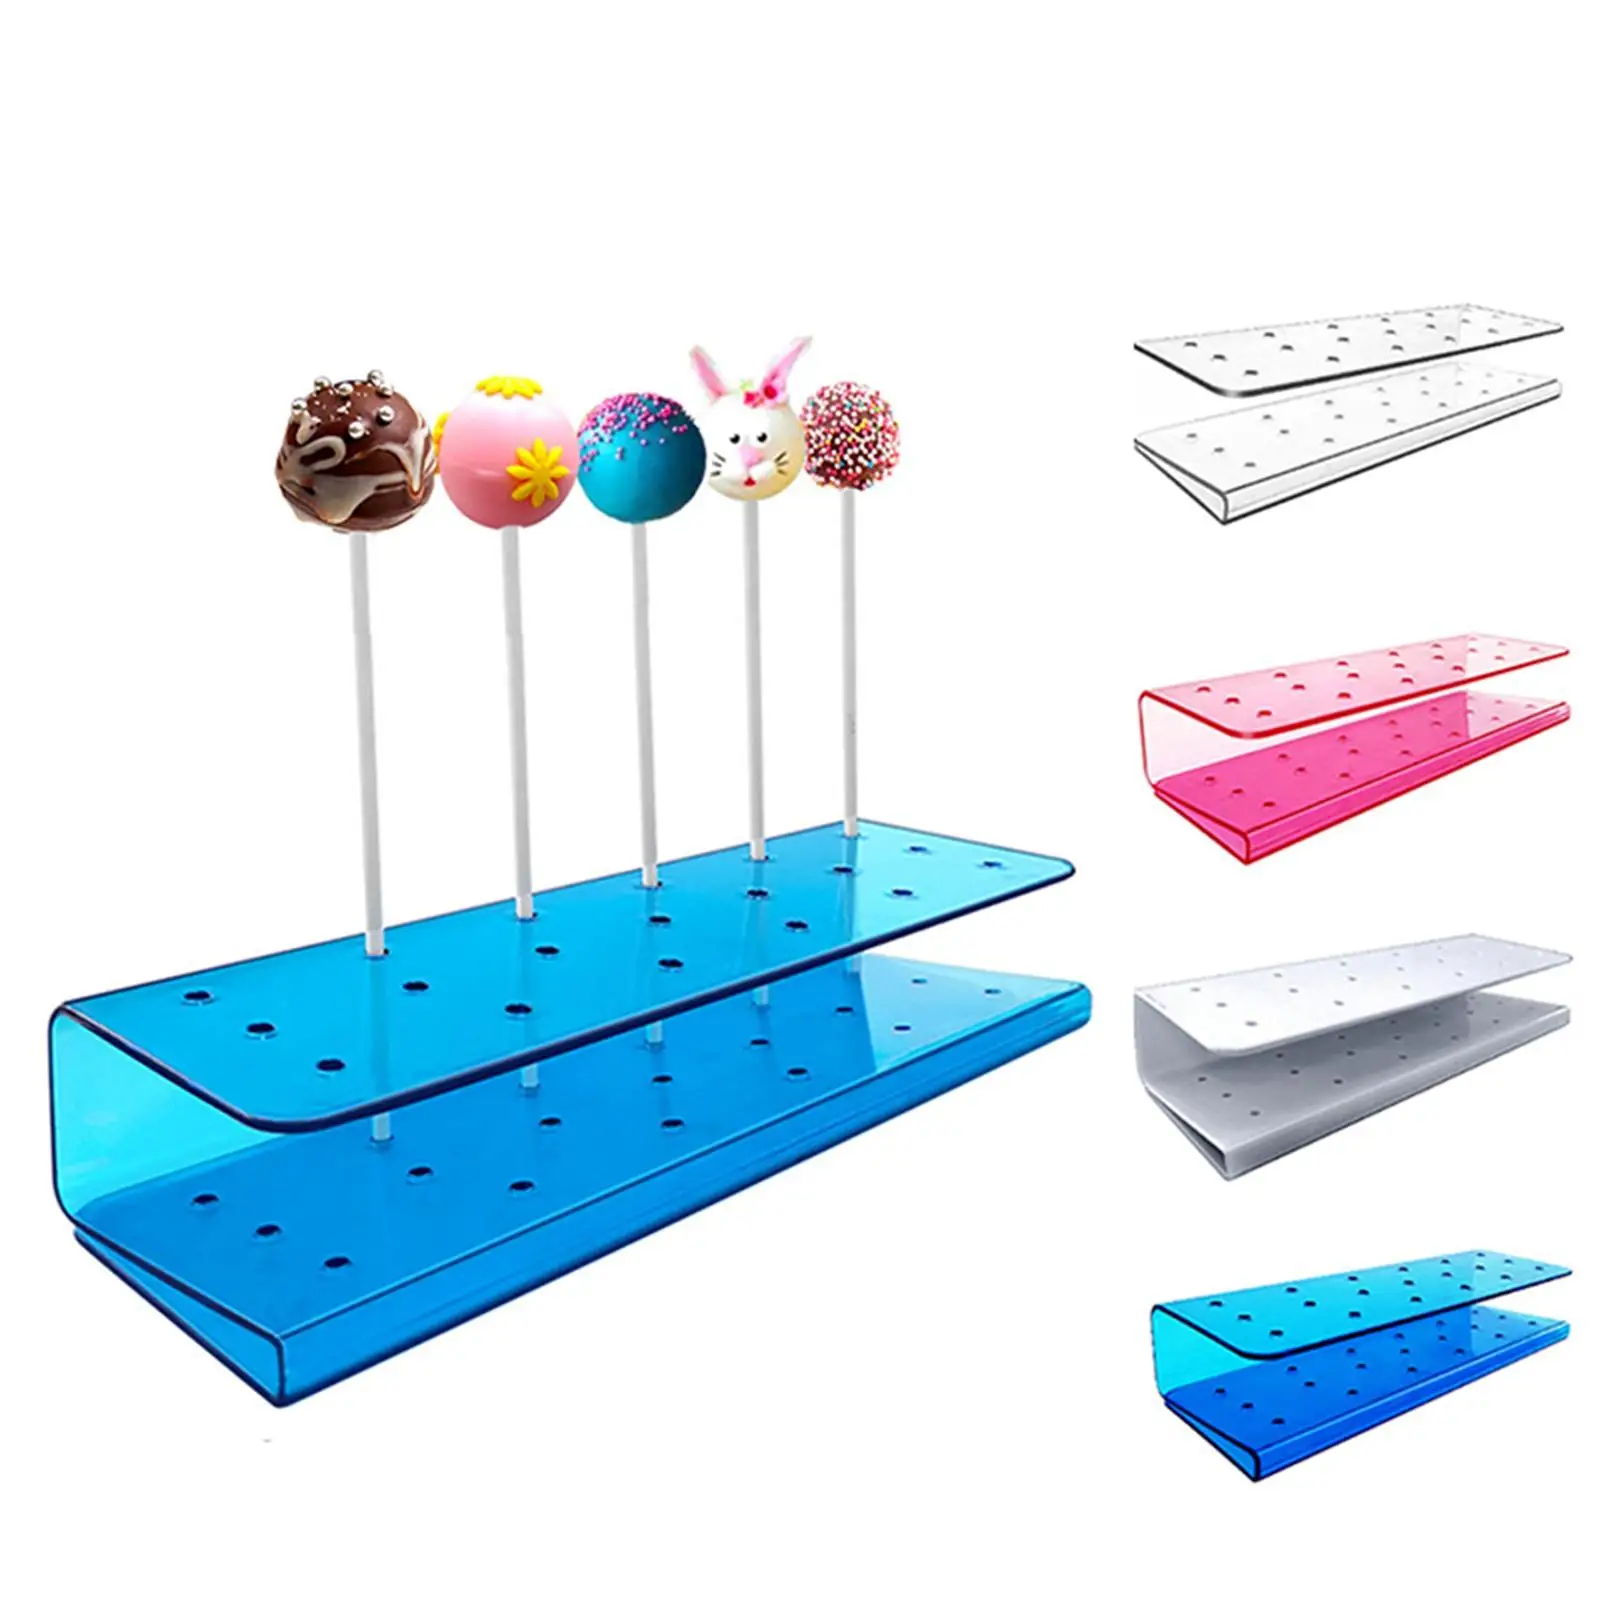 Acrylic Transparent Lollipop Display Stand 19/20 Holes Candy Rack Shelf DIY Bakeware Gadgets for Wedding Birthday Party Baking